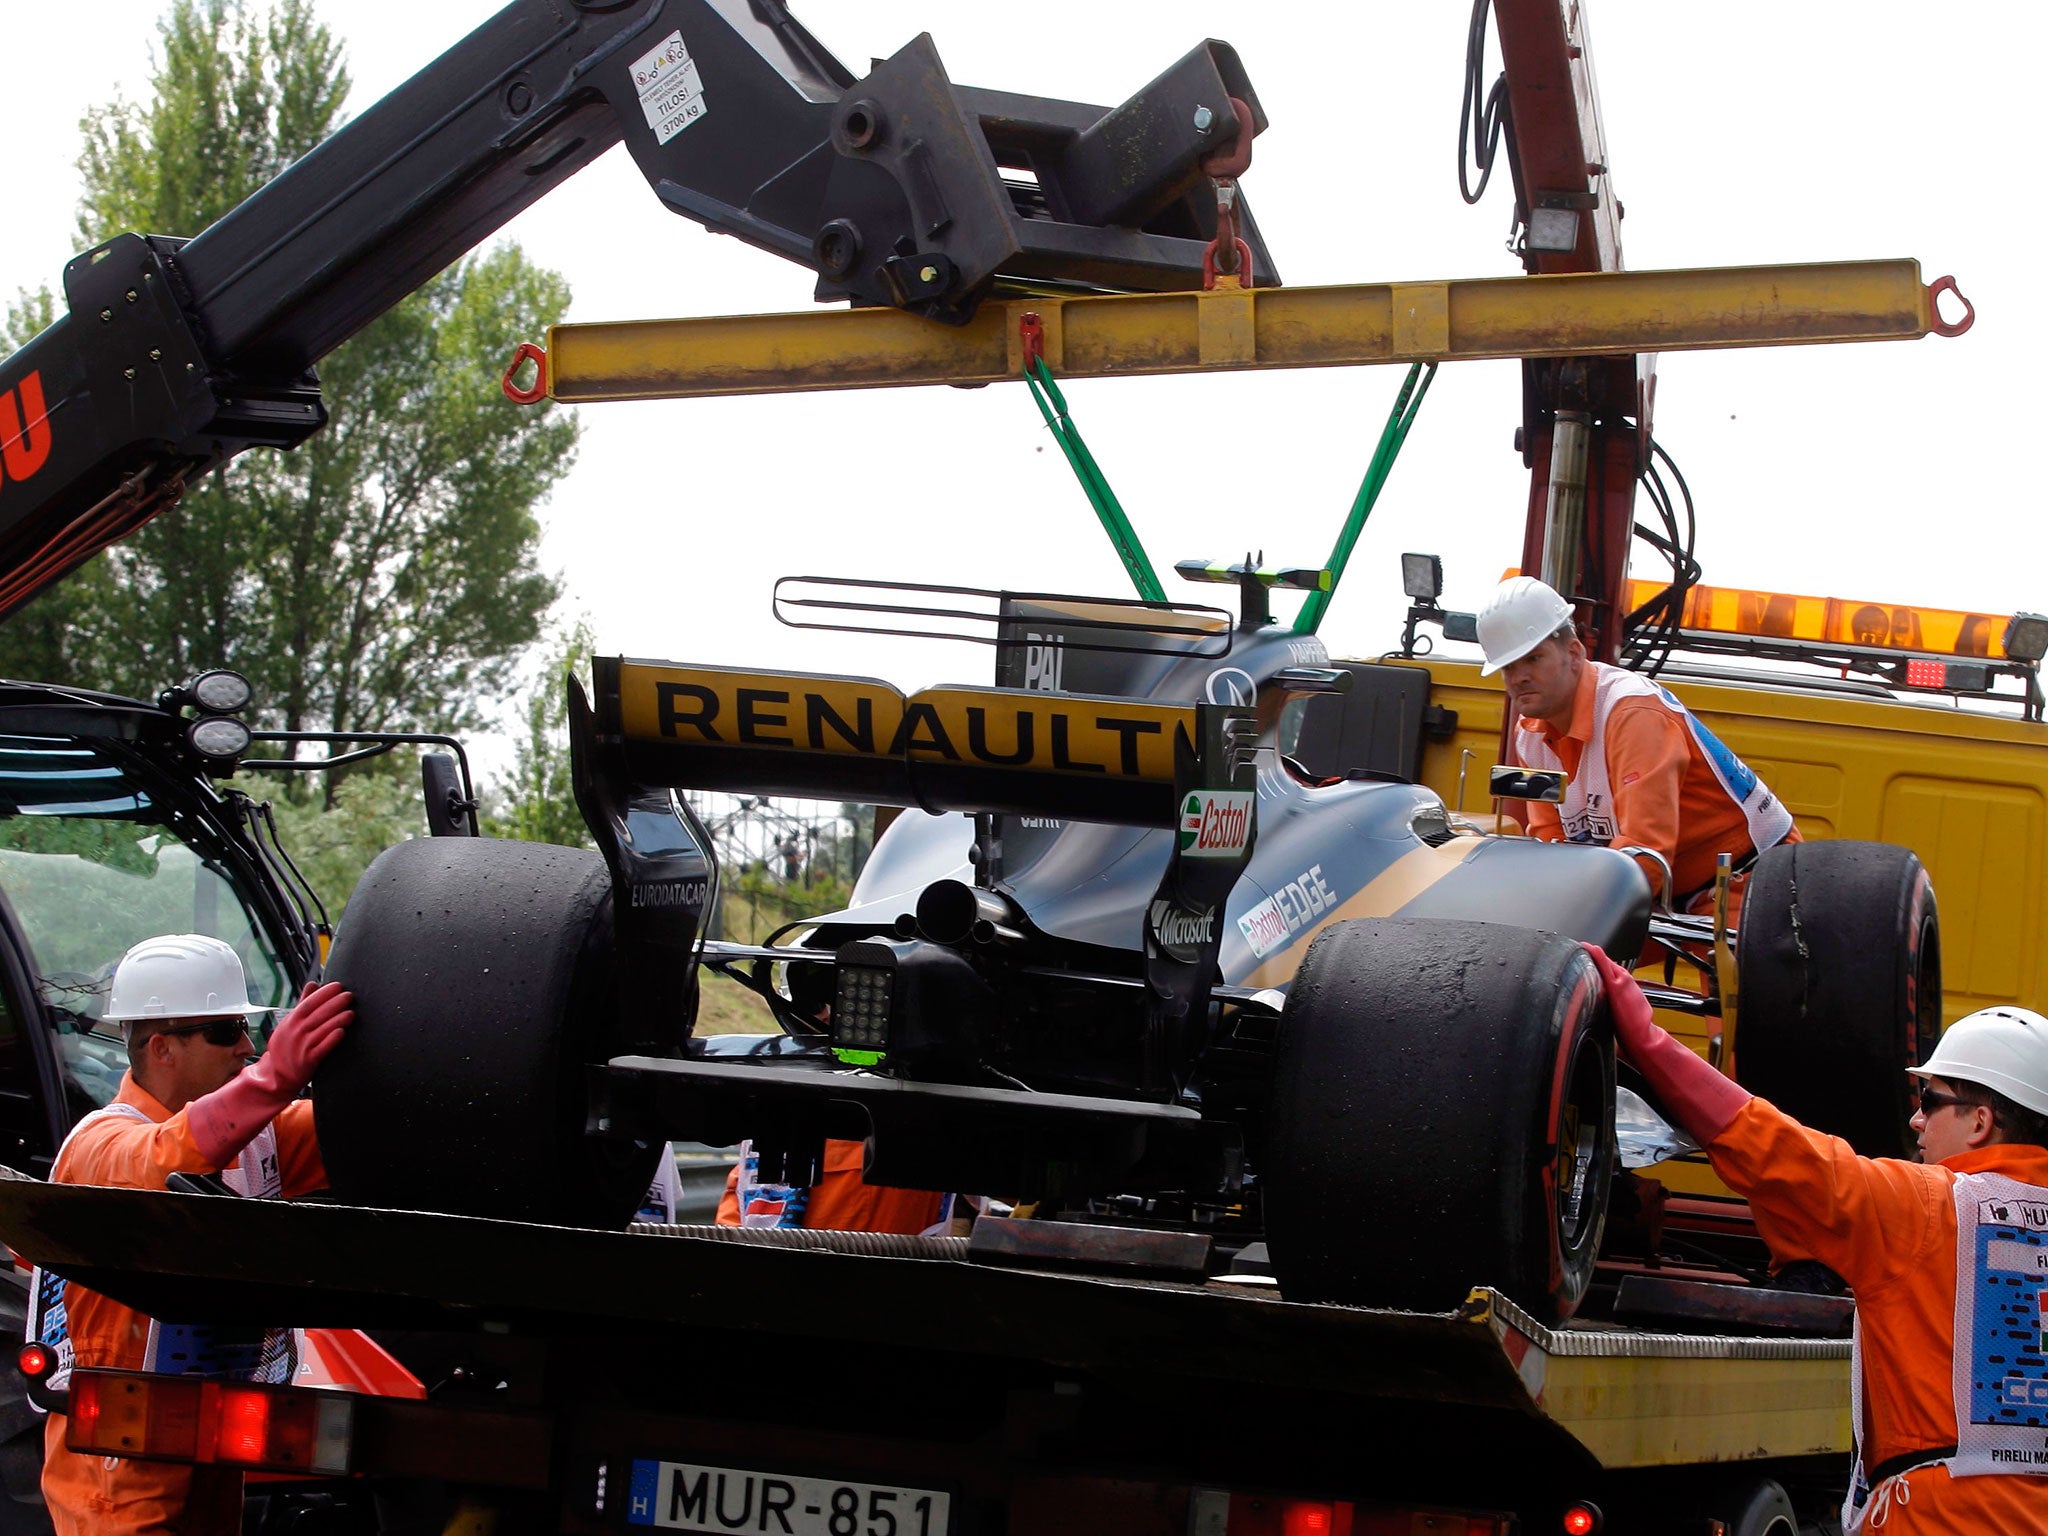 Palmer also crashed out of the first practice session when his front wing collapsed